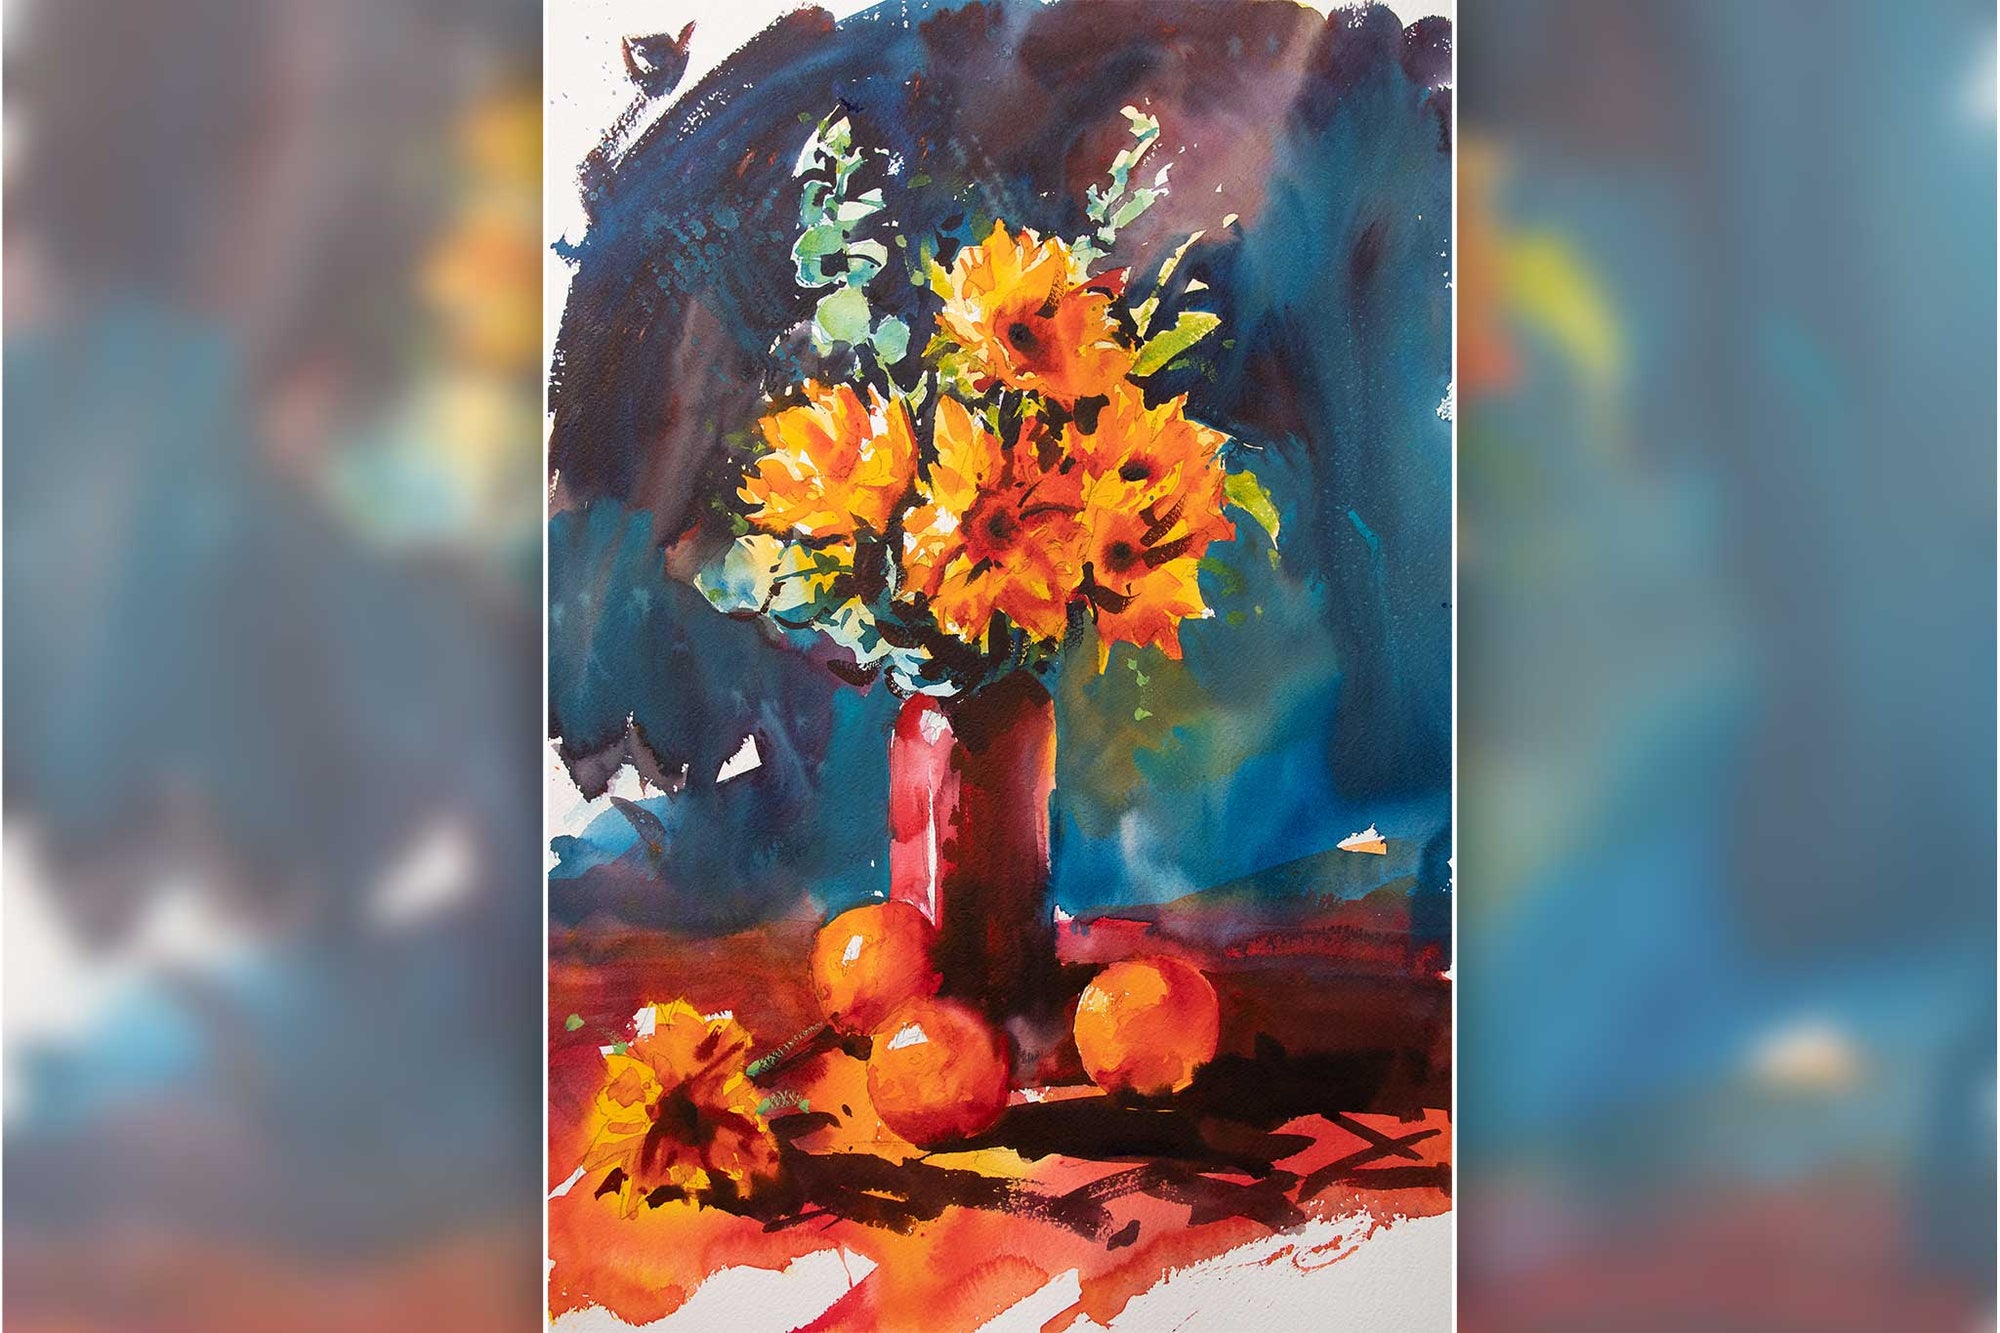 Paint the Shapes - Flower Still Life : Preview